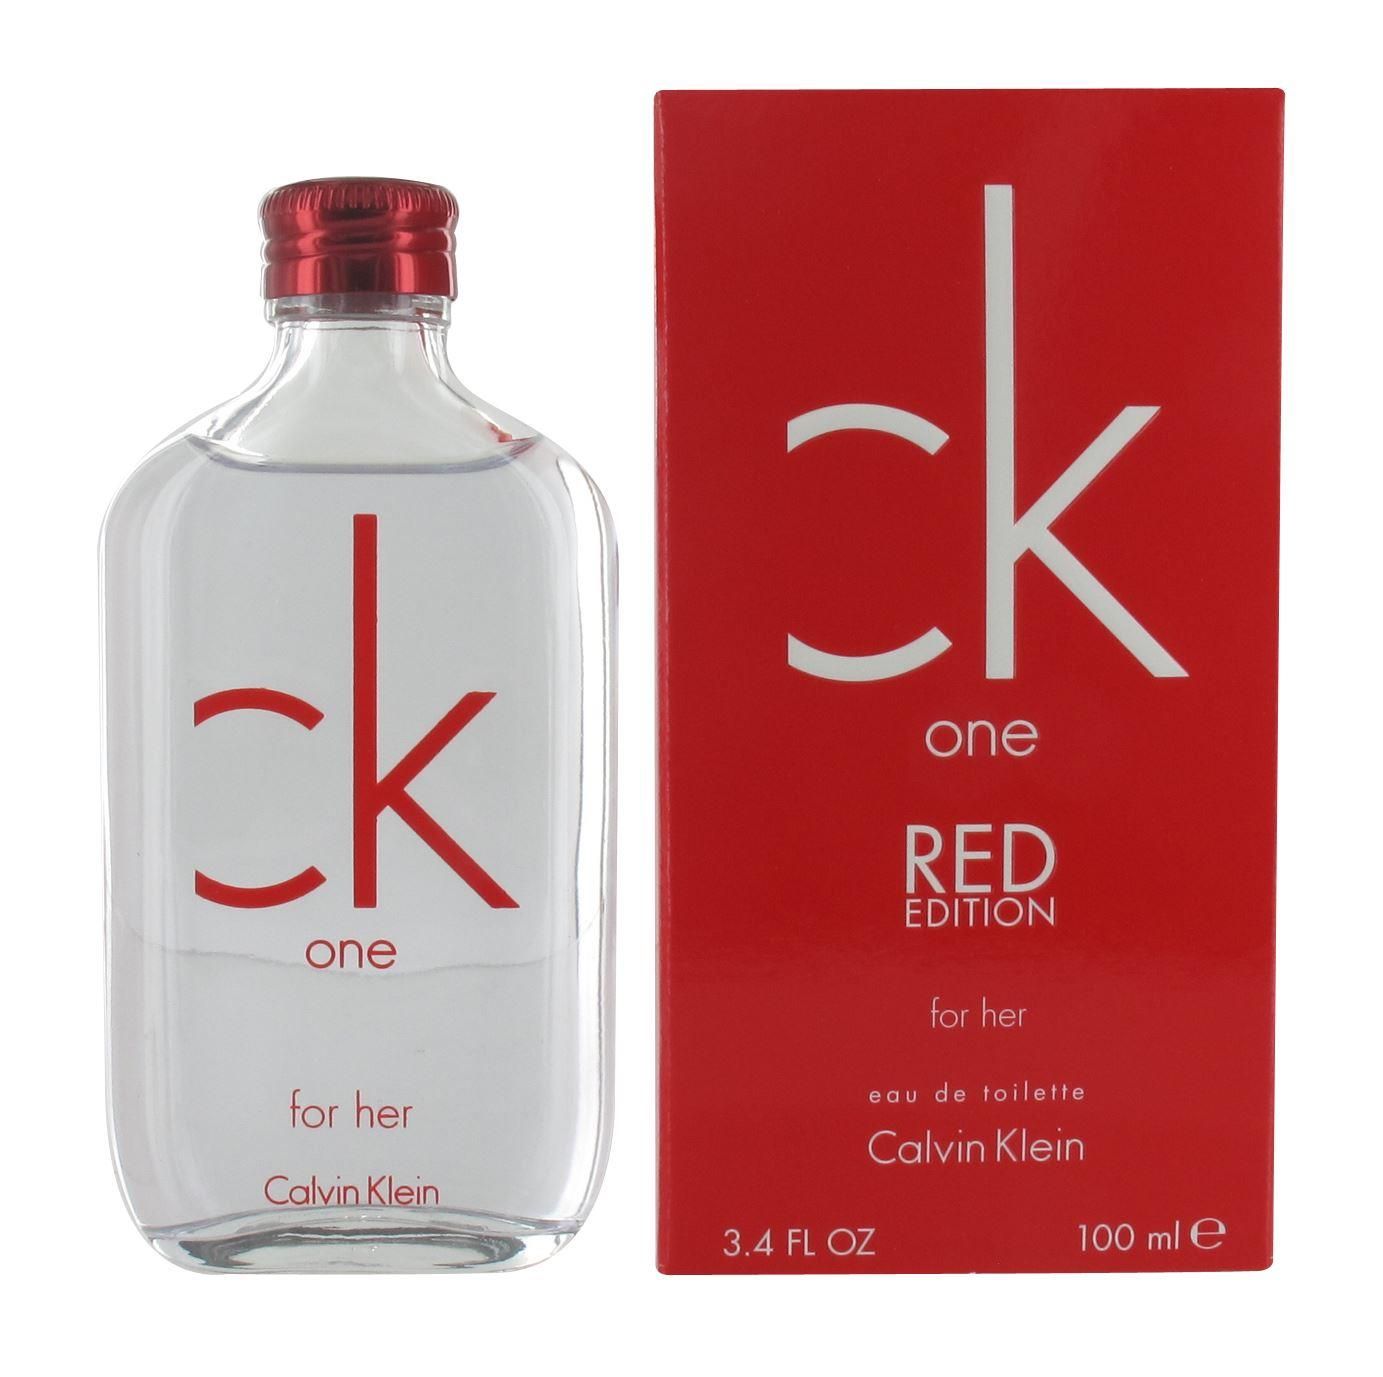 ck one aftershave